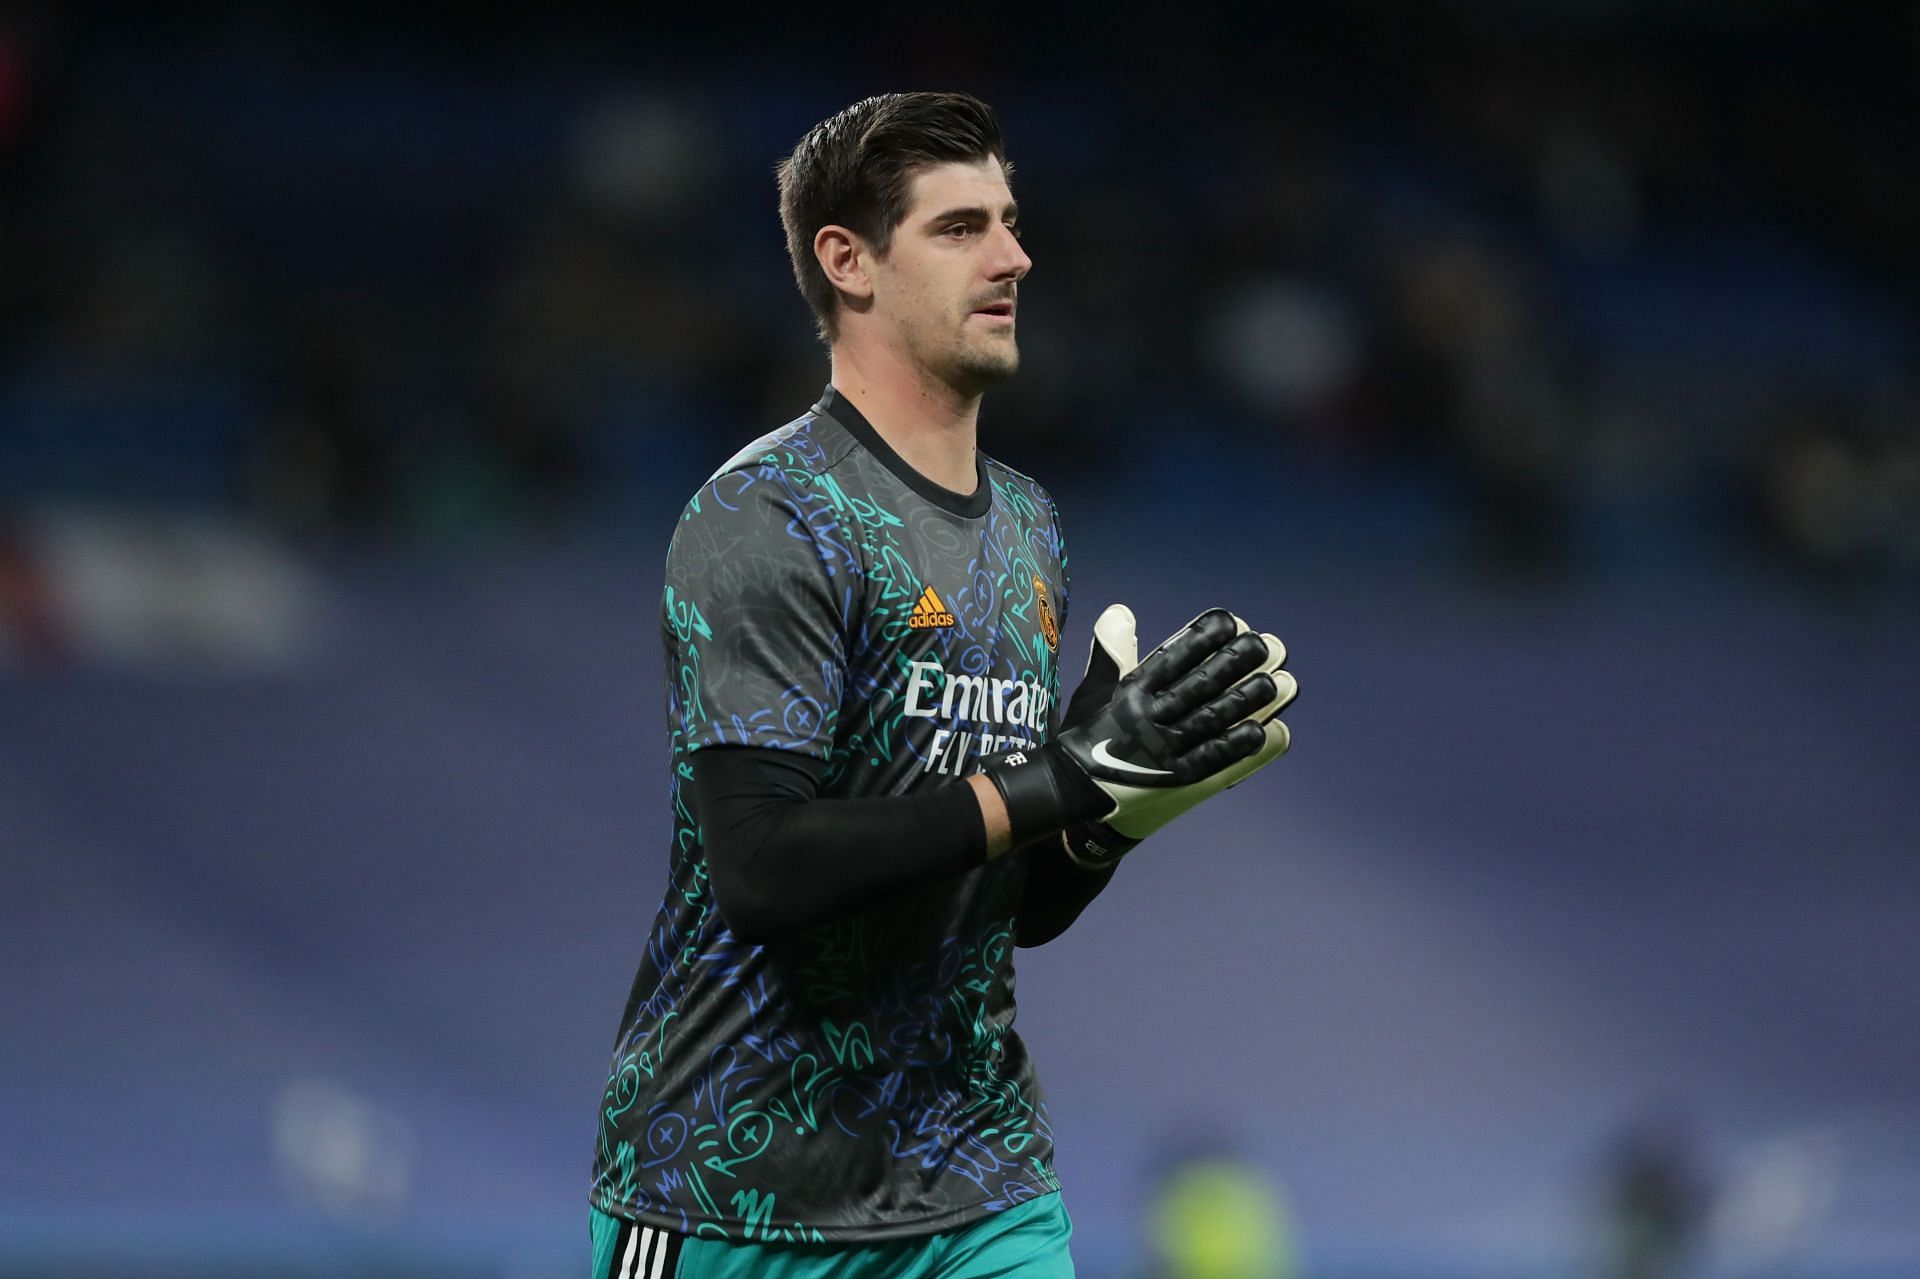 Thibaut Courtois has been rock-solid this season for Real Madrid.